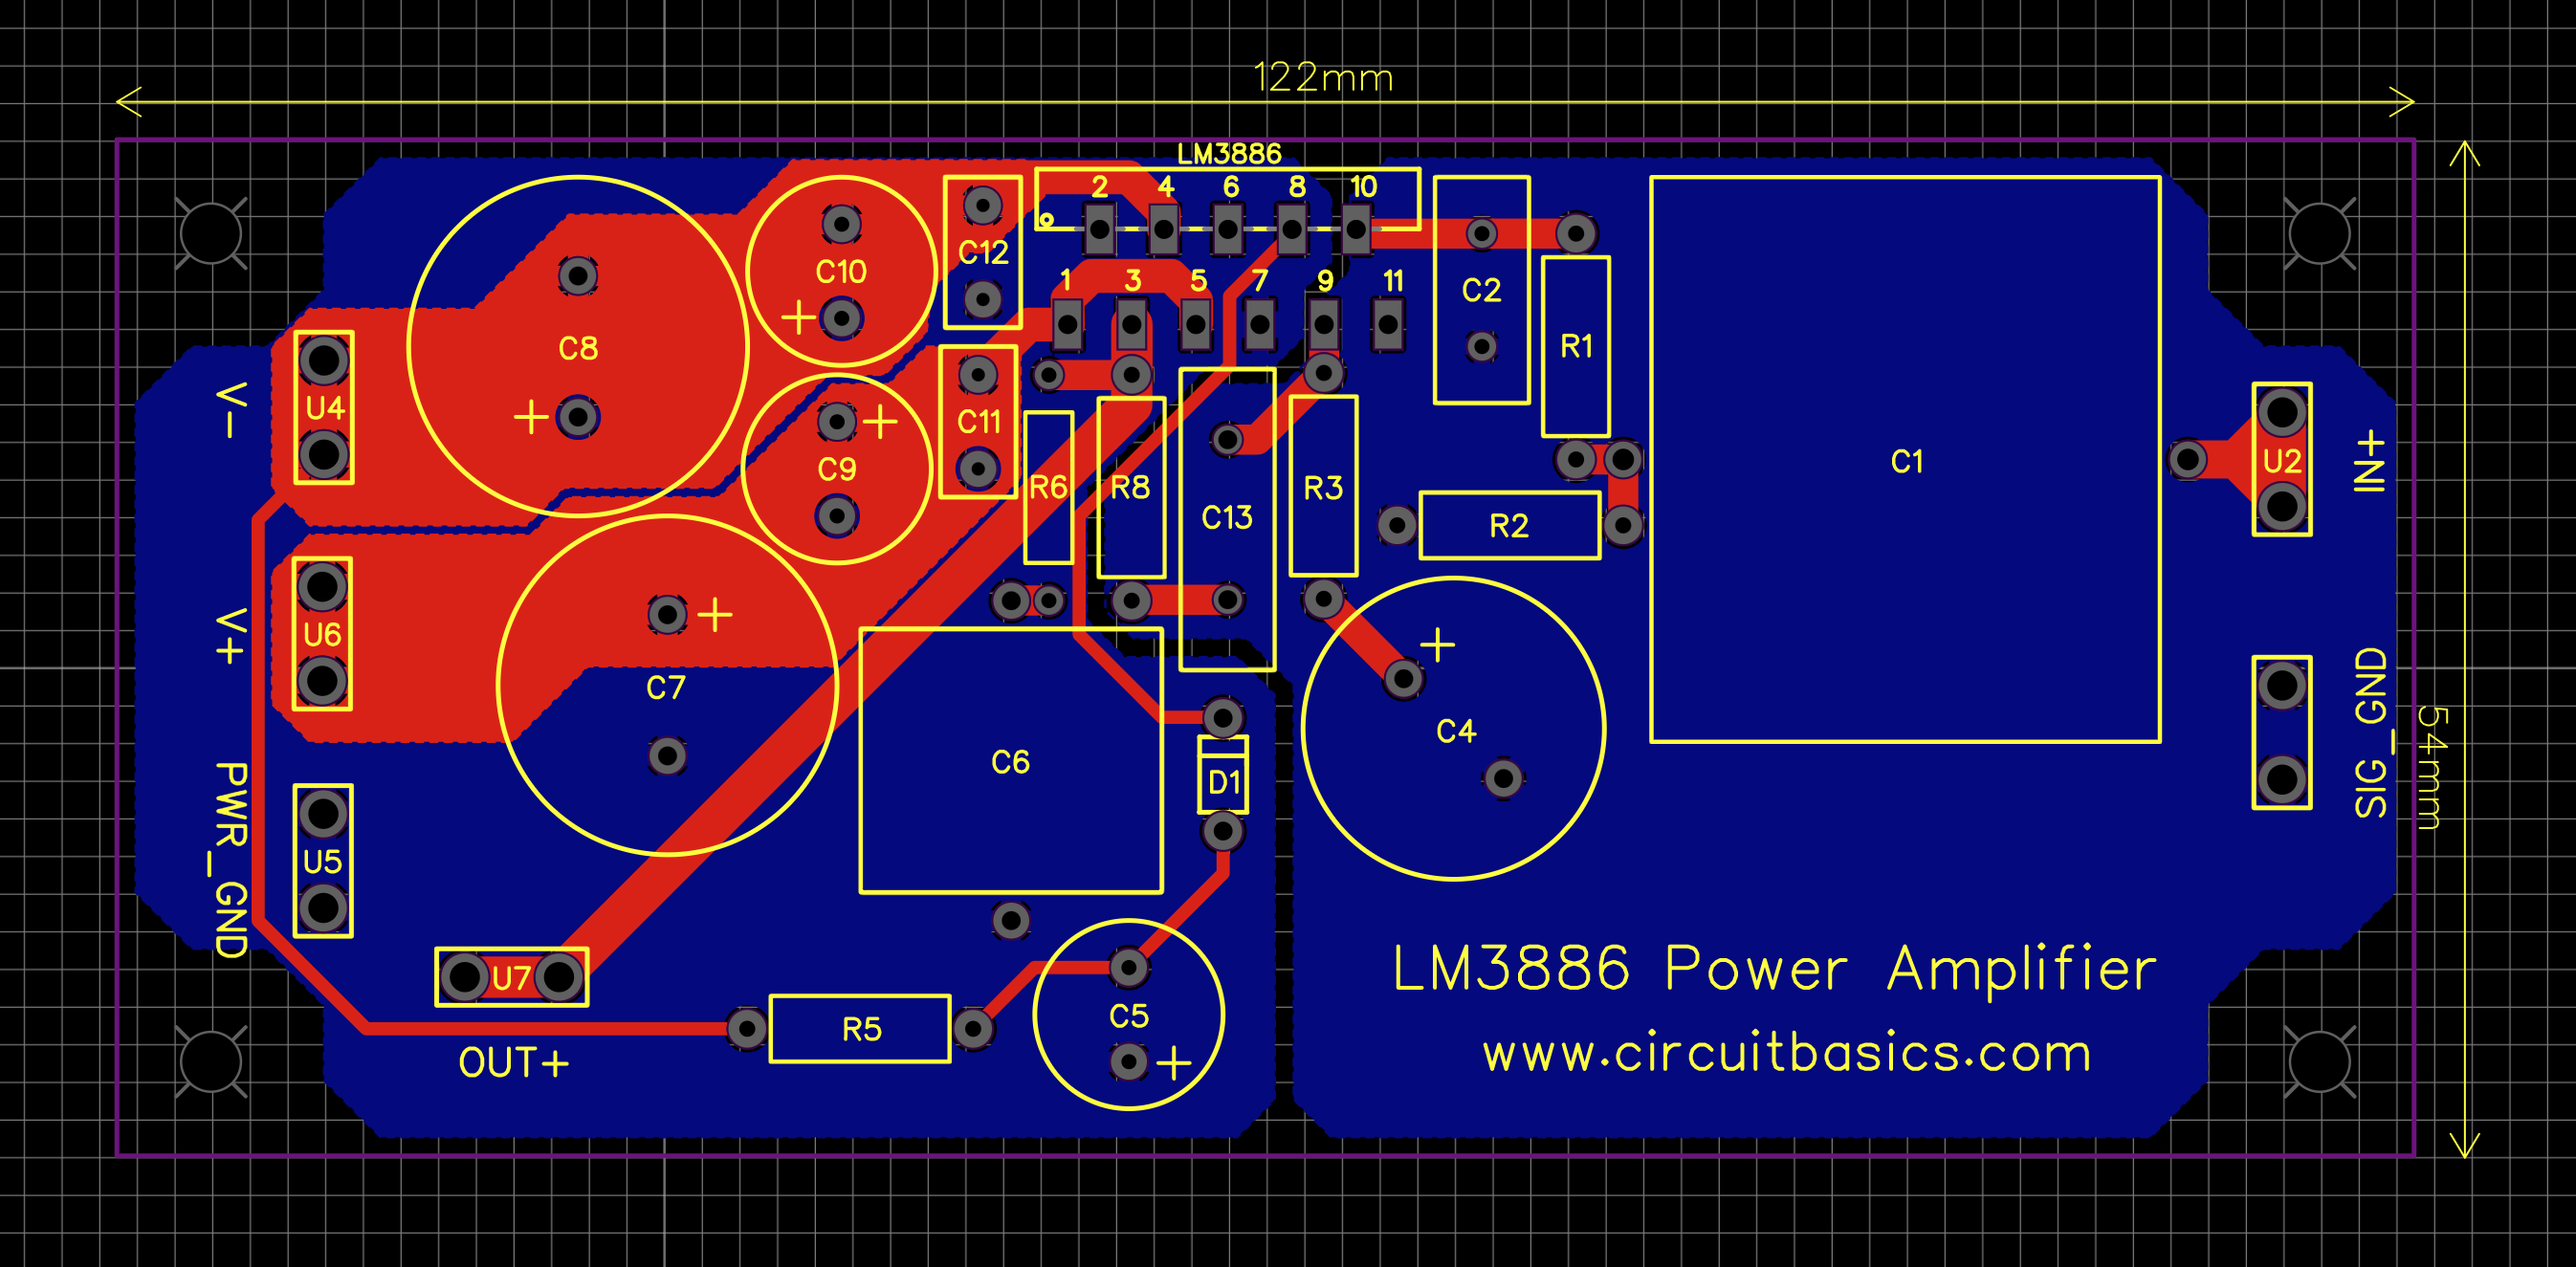 Best Practices for Designing a PCB Layout